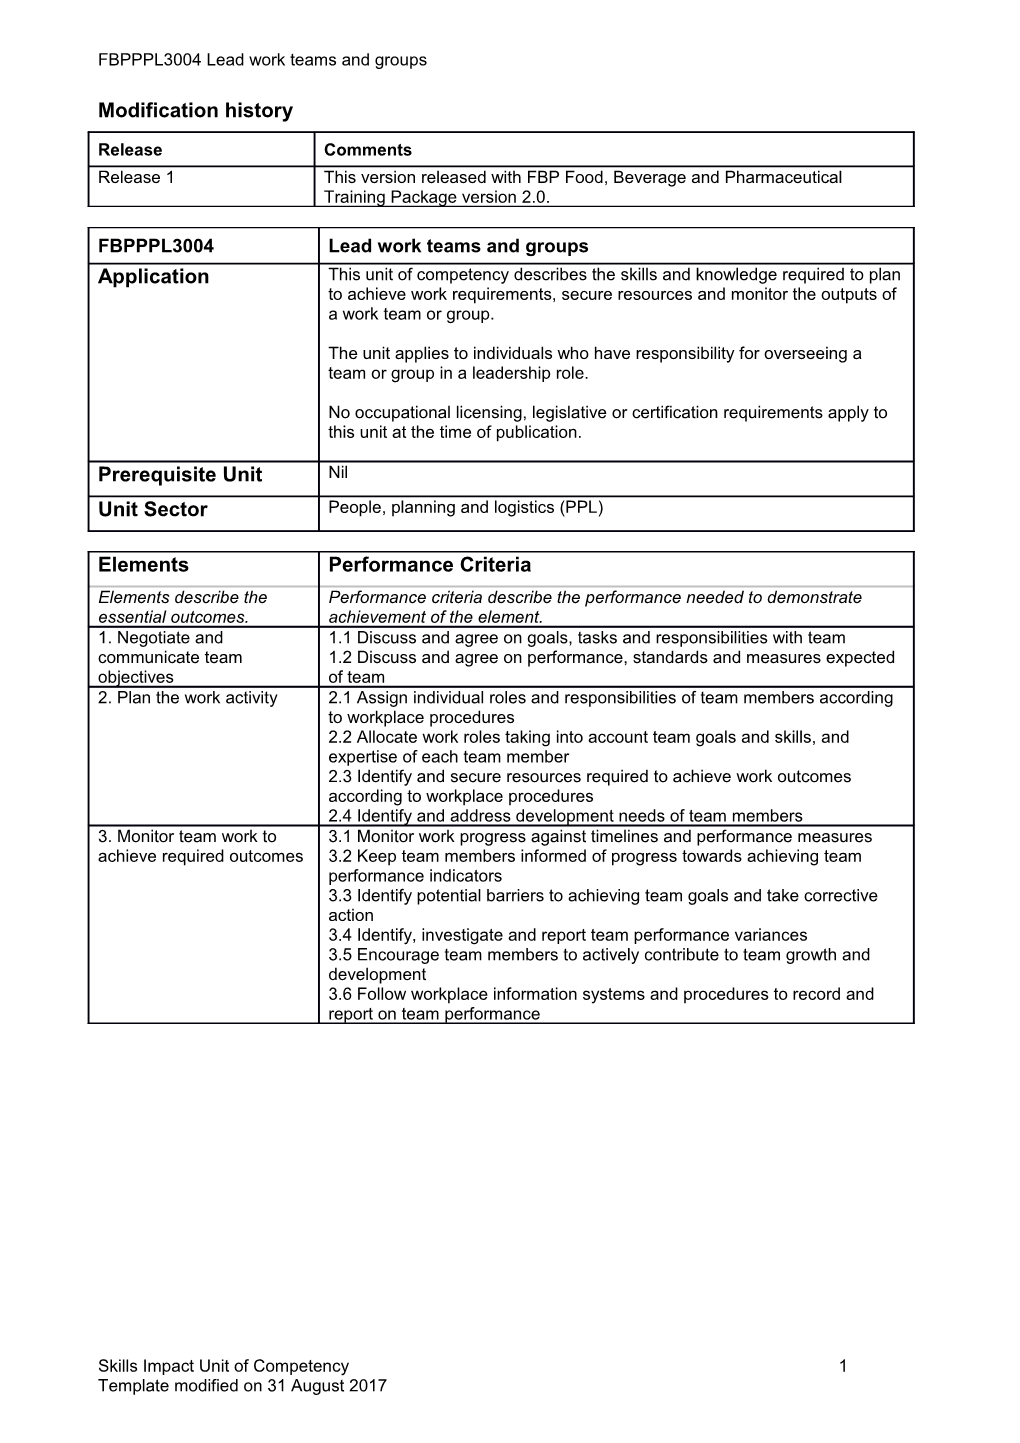 Skills Impact Unit of Competency Template s25